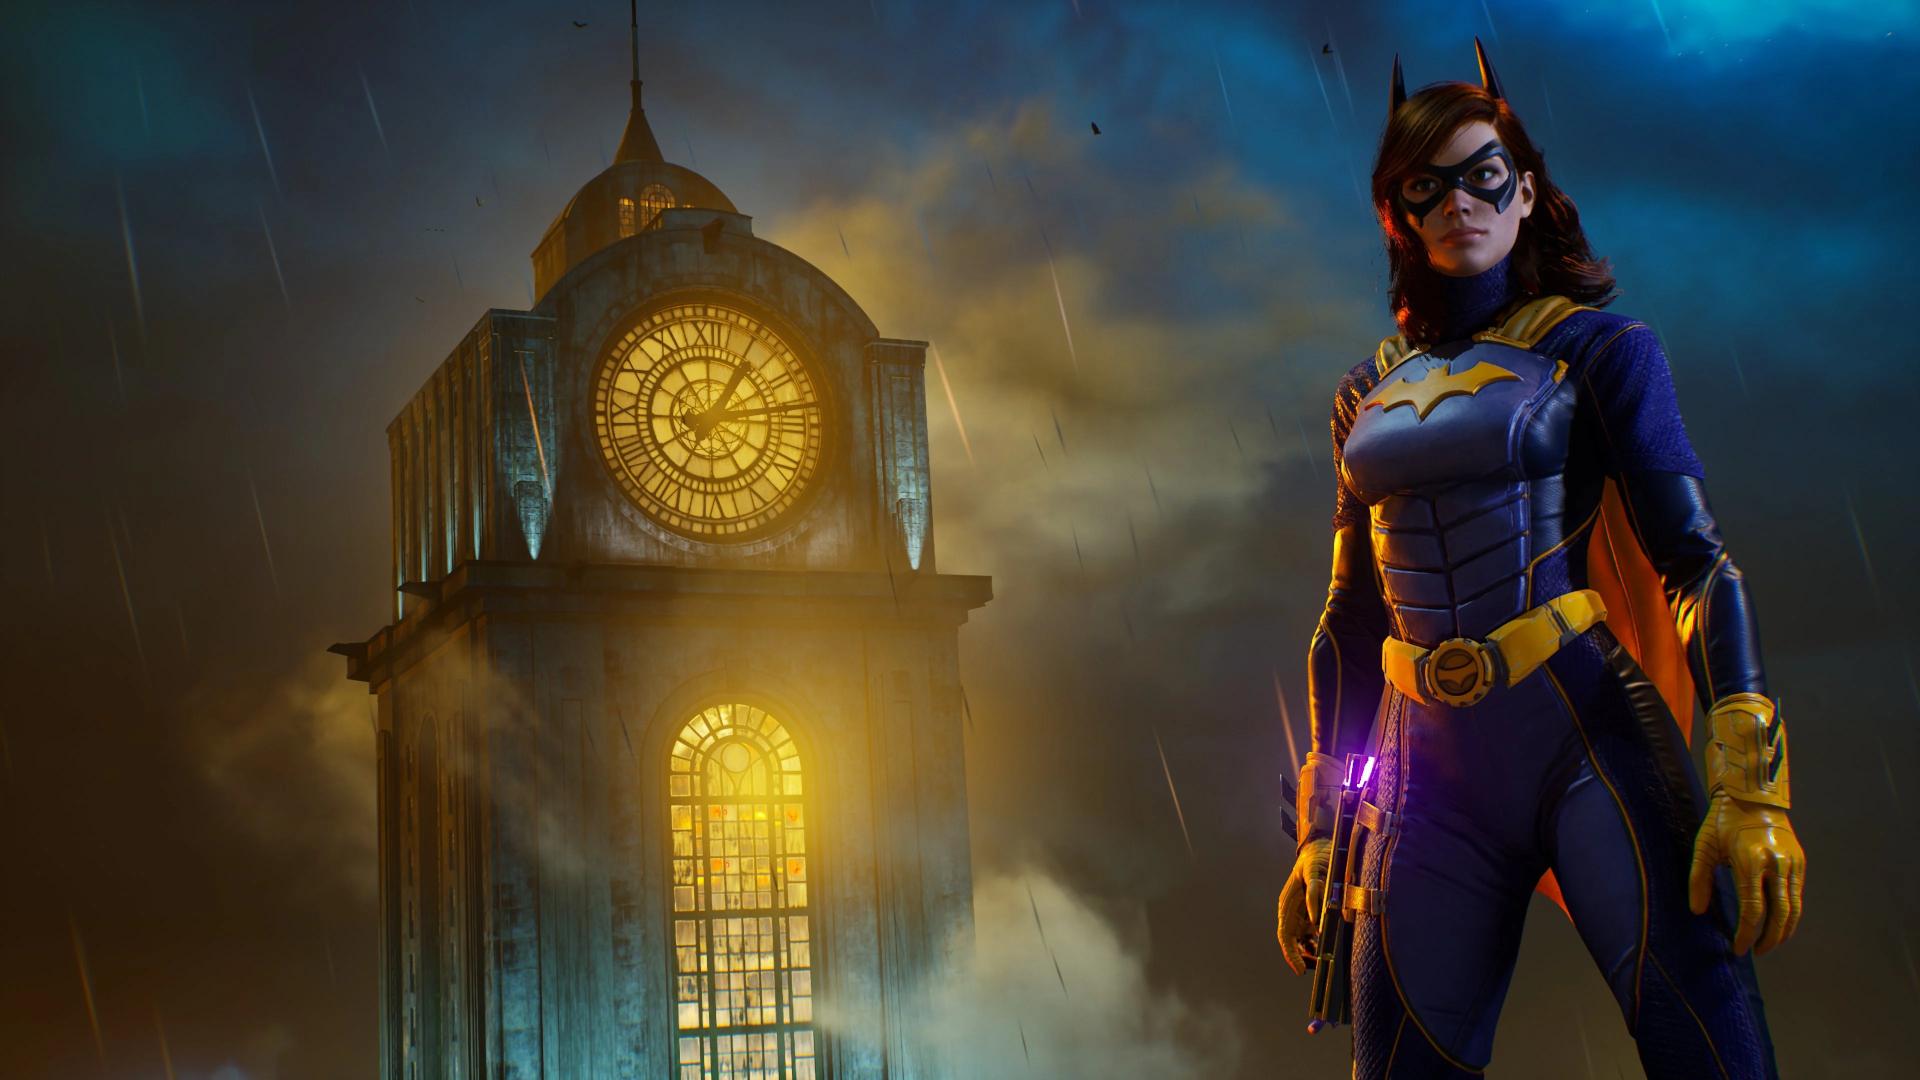 Gotham Knights - Batgirl poses in front of a clock tower at night